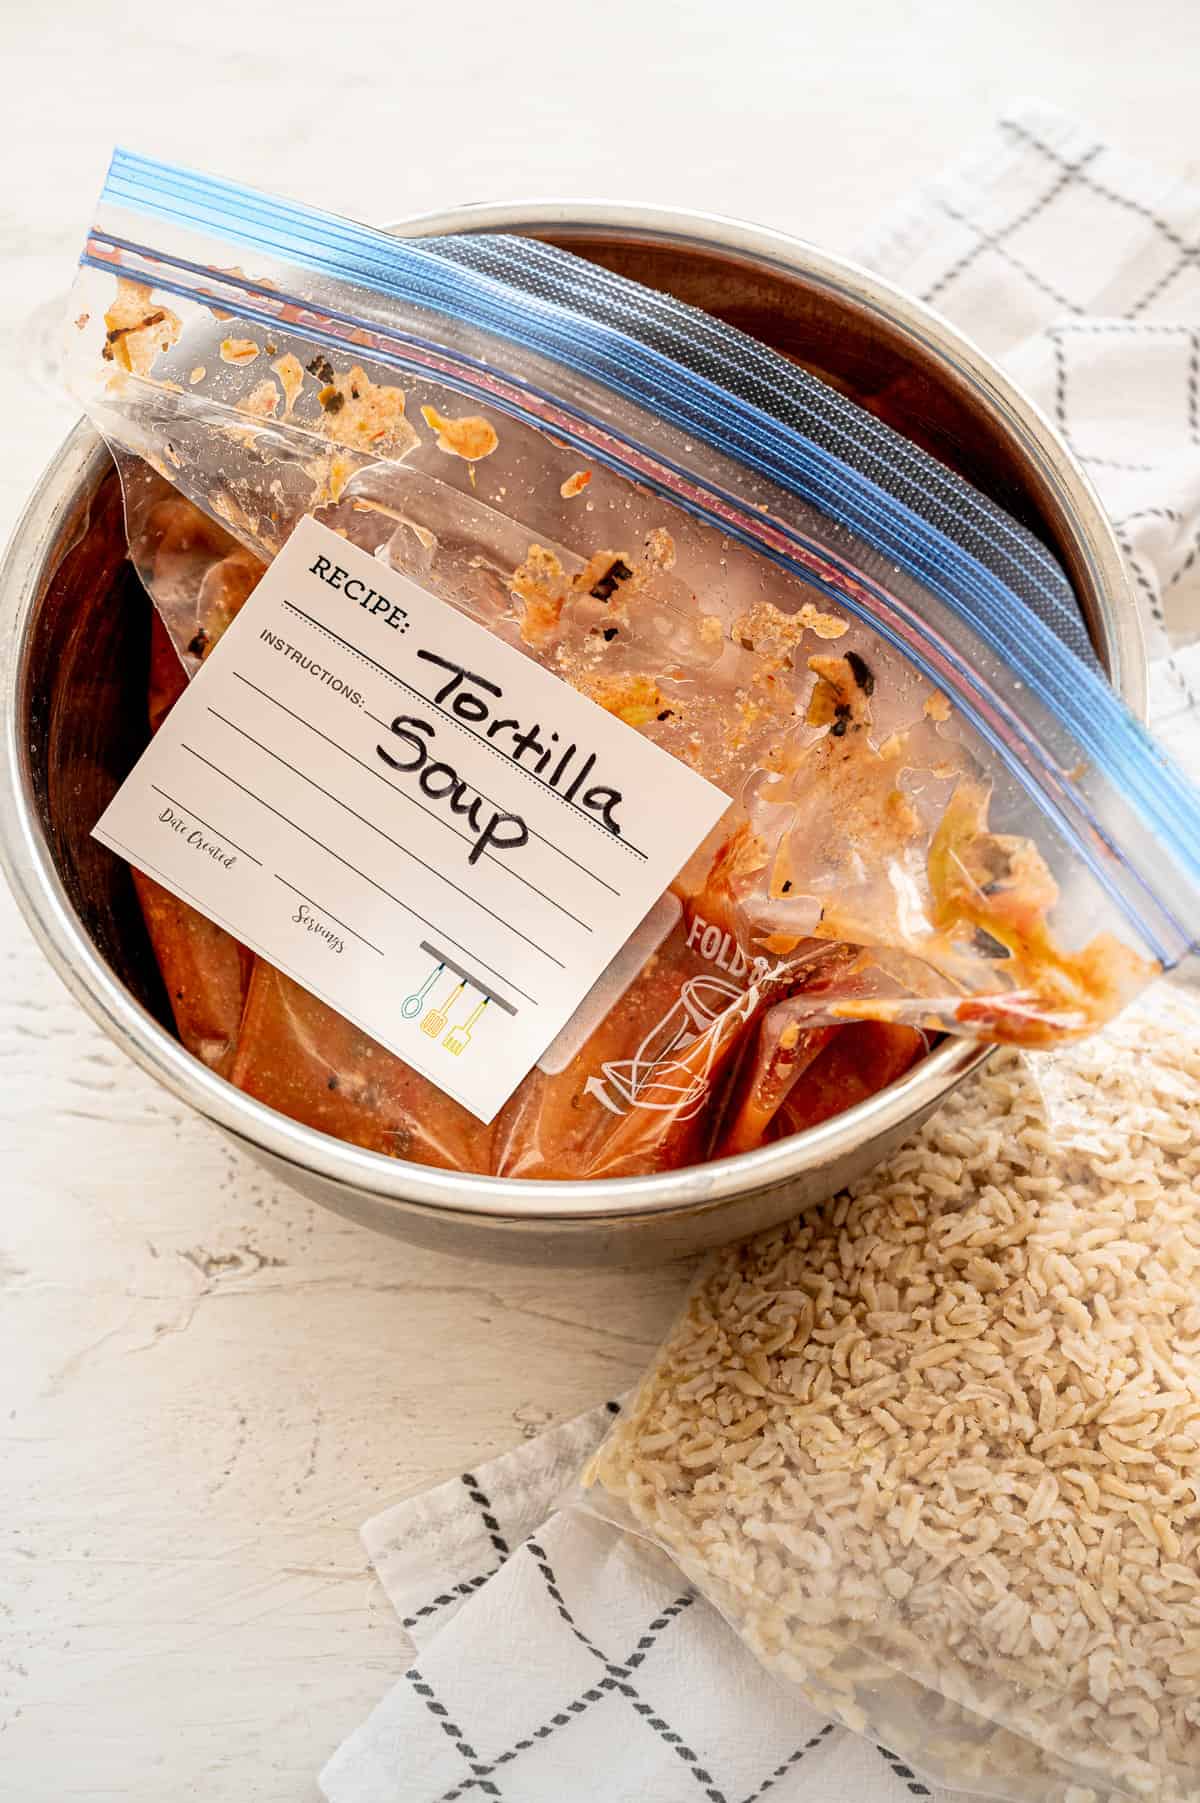 Full freezer bag labeled Tortilla Soup sitting inside an Instant Pot with a bag of rice beside it.